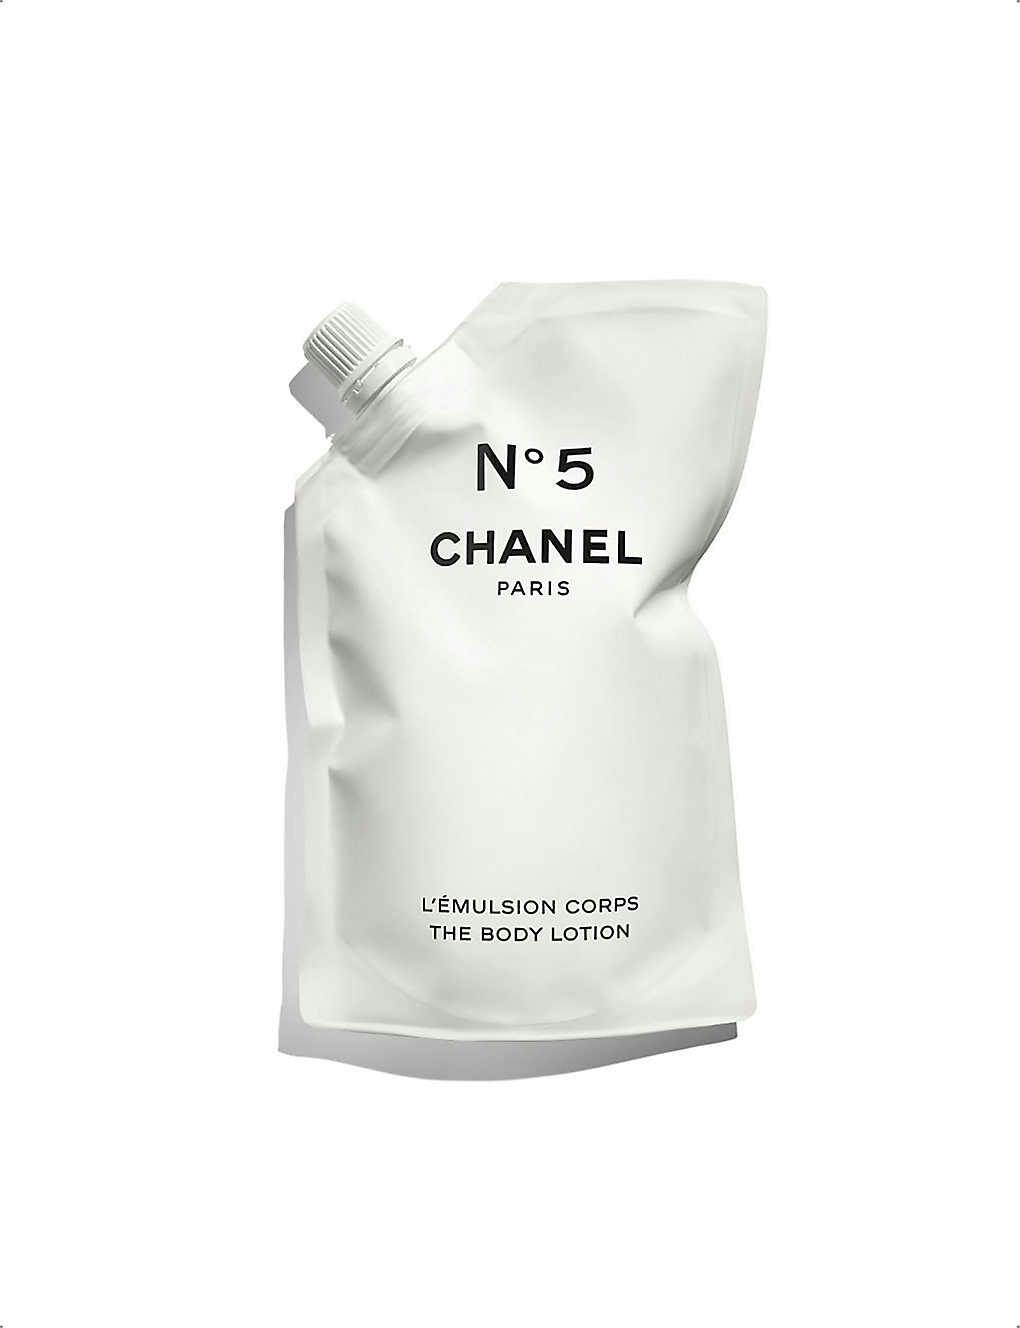 Cookie Gigan on Twitter With the Launch of Chanel Factory5 when you  purchased 5 items you received this Chanel Mesh Bag Perfect as a shopping  or beach bag I also received as